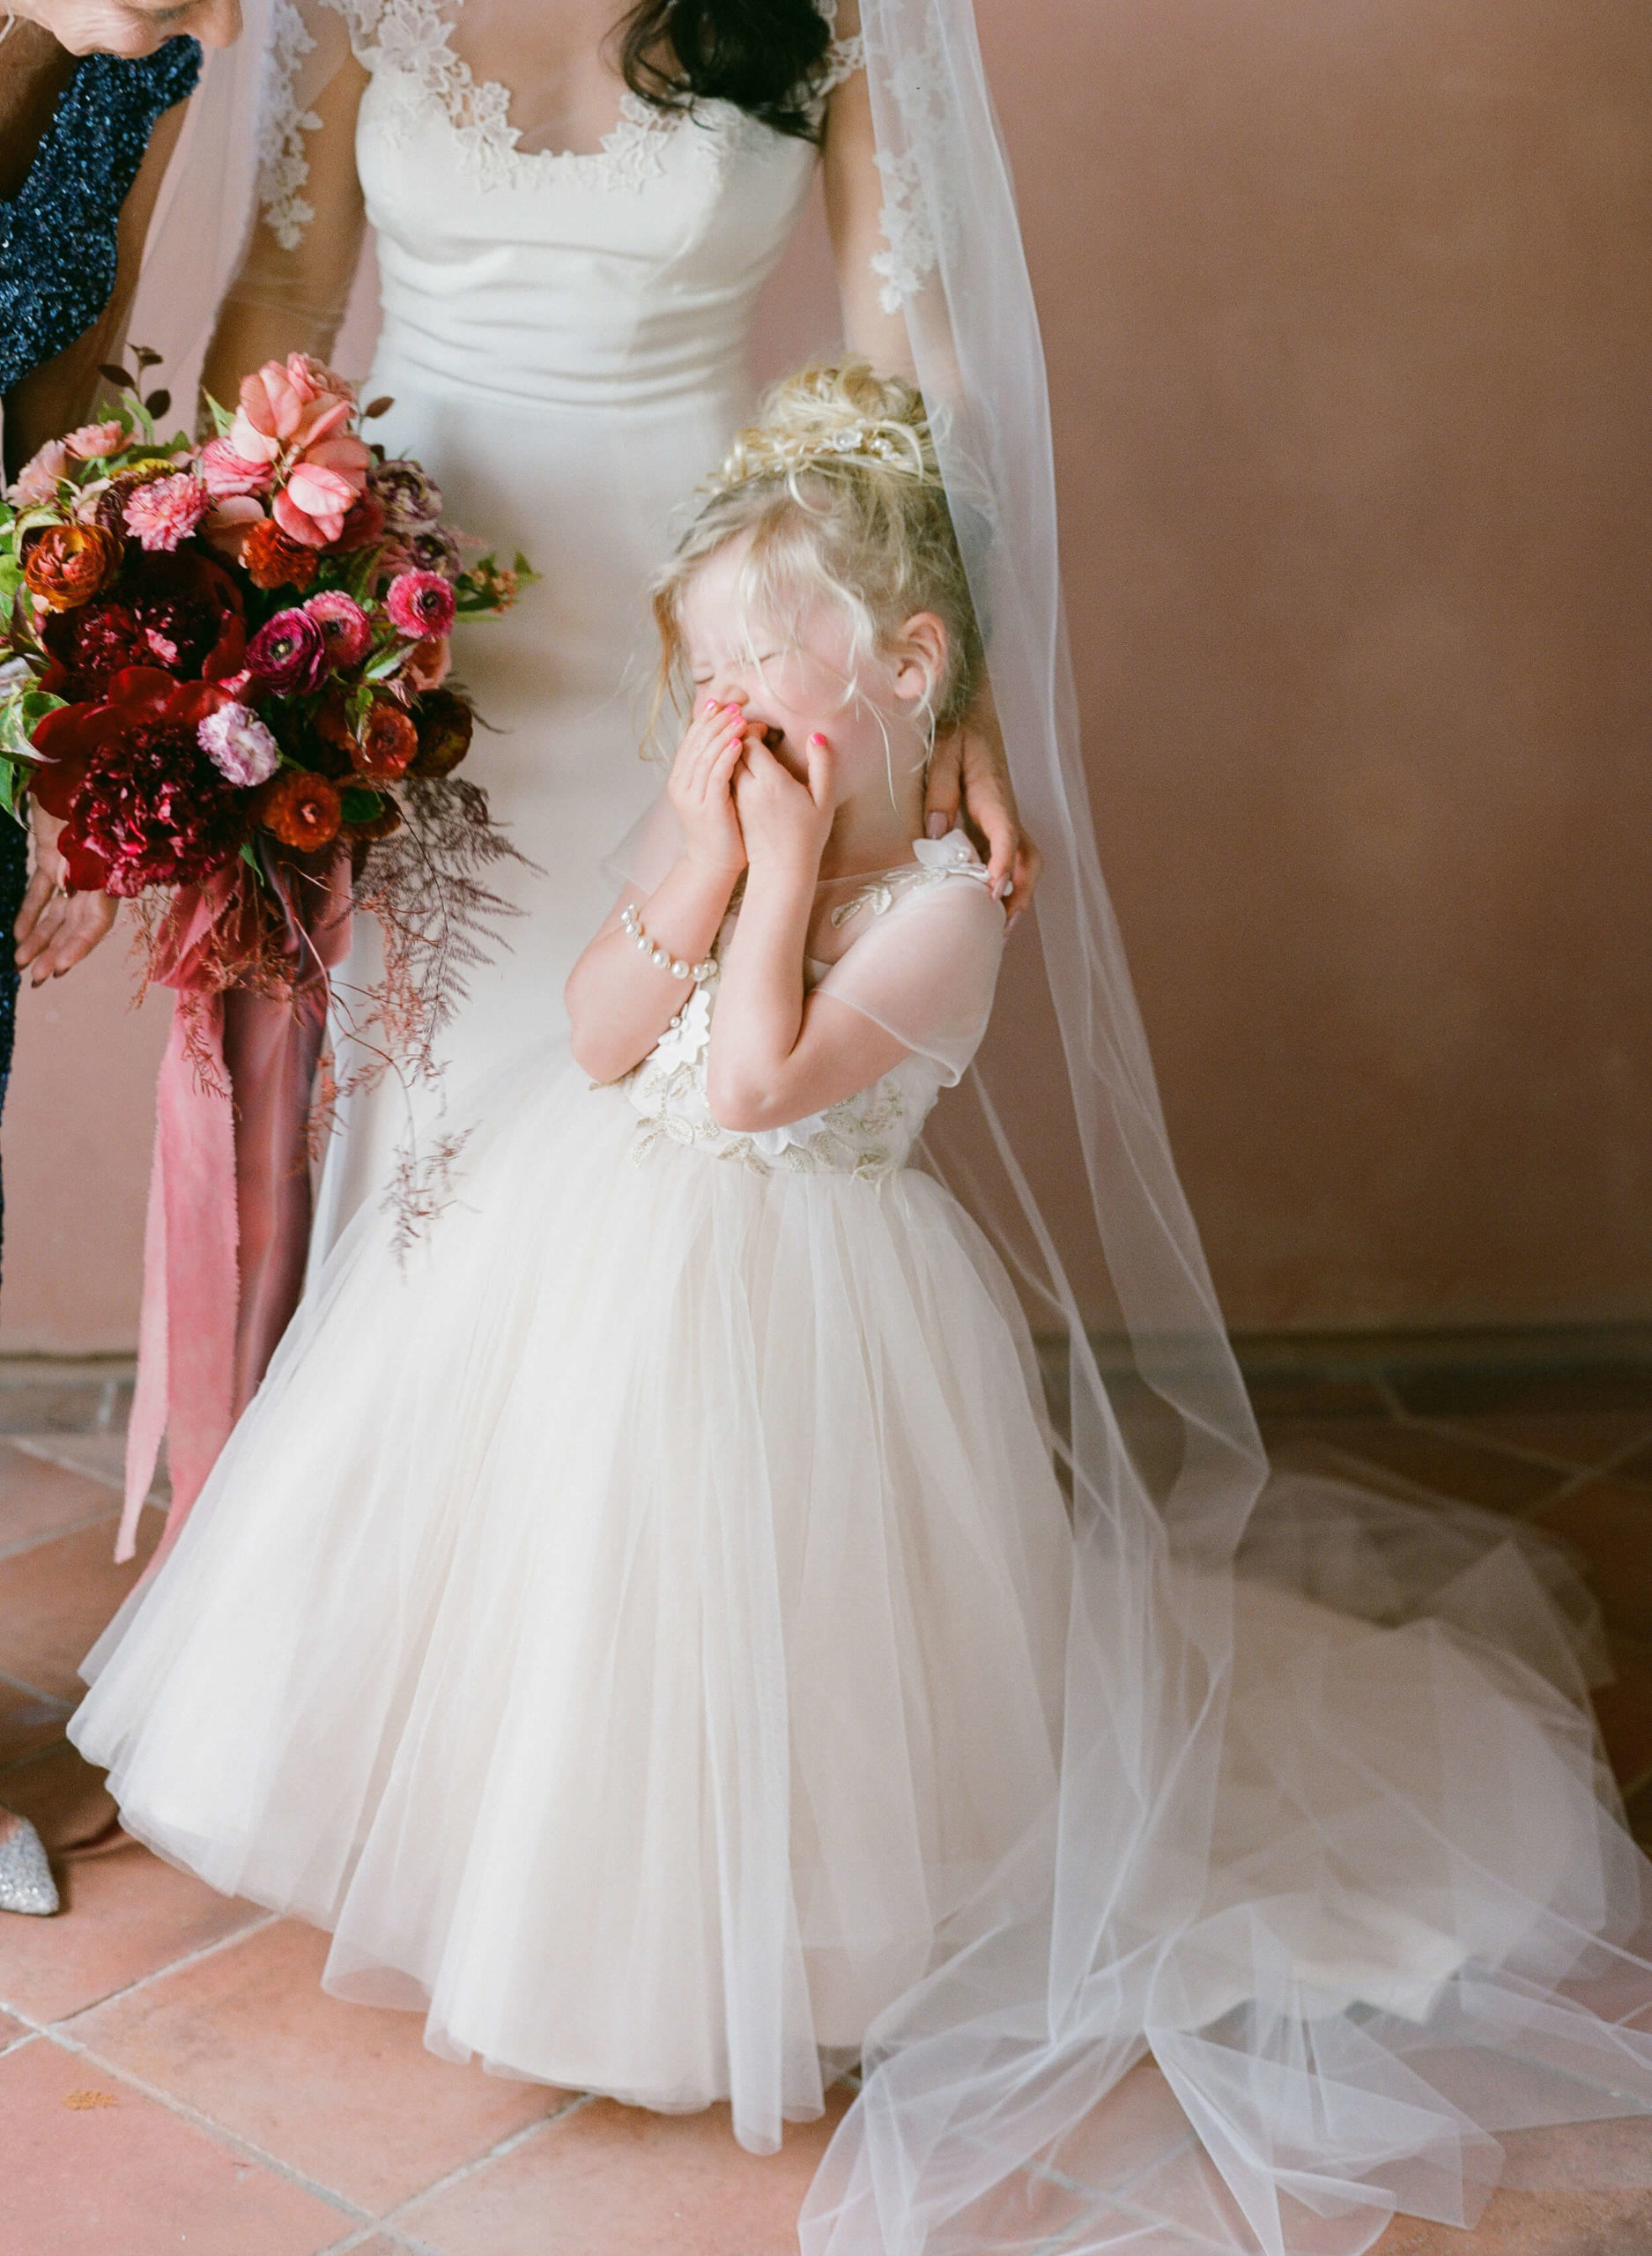 flower girl laughing with bride